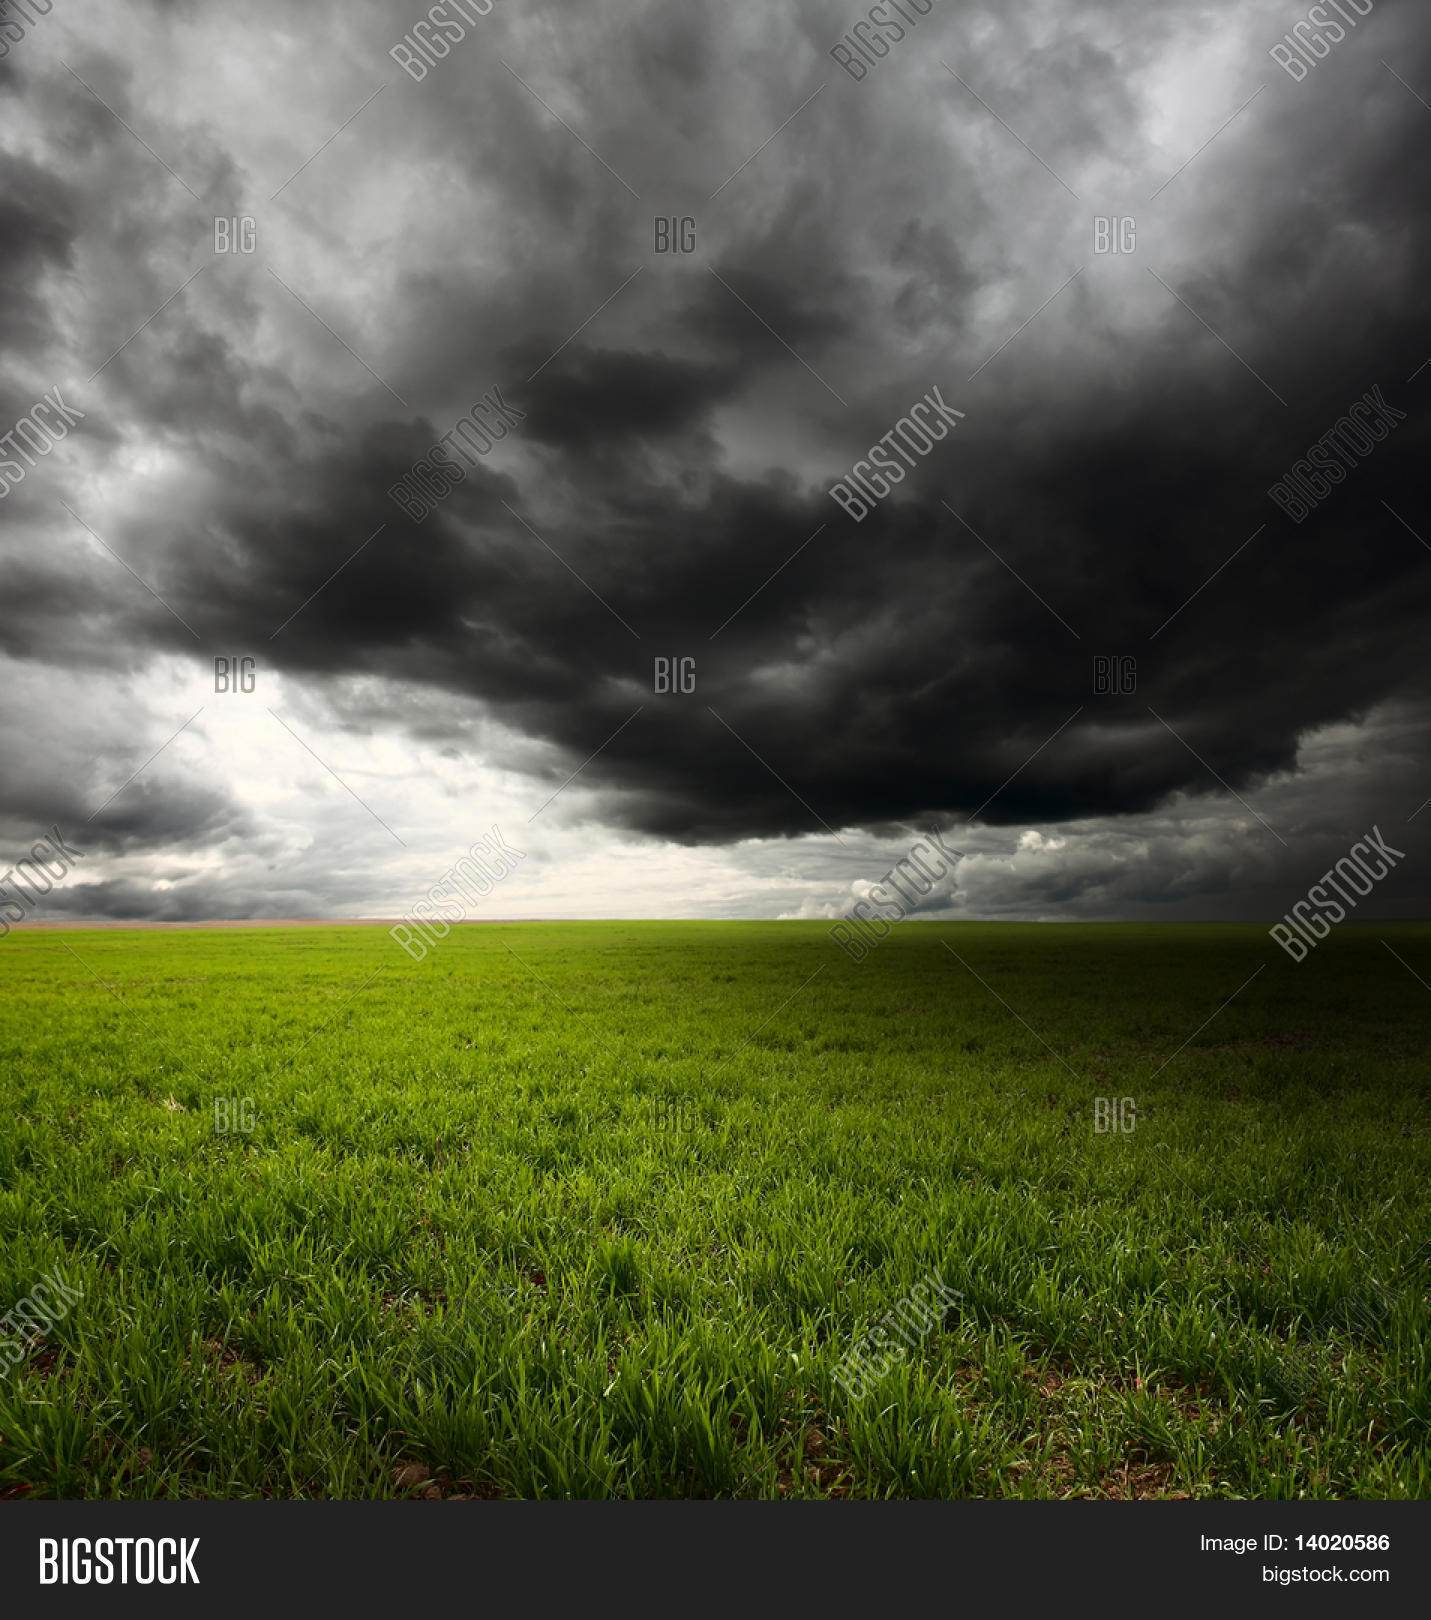 Storm Dark Clouds Flying Over Field Image & Photo | Bigstock